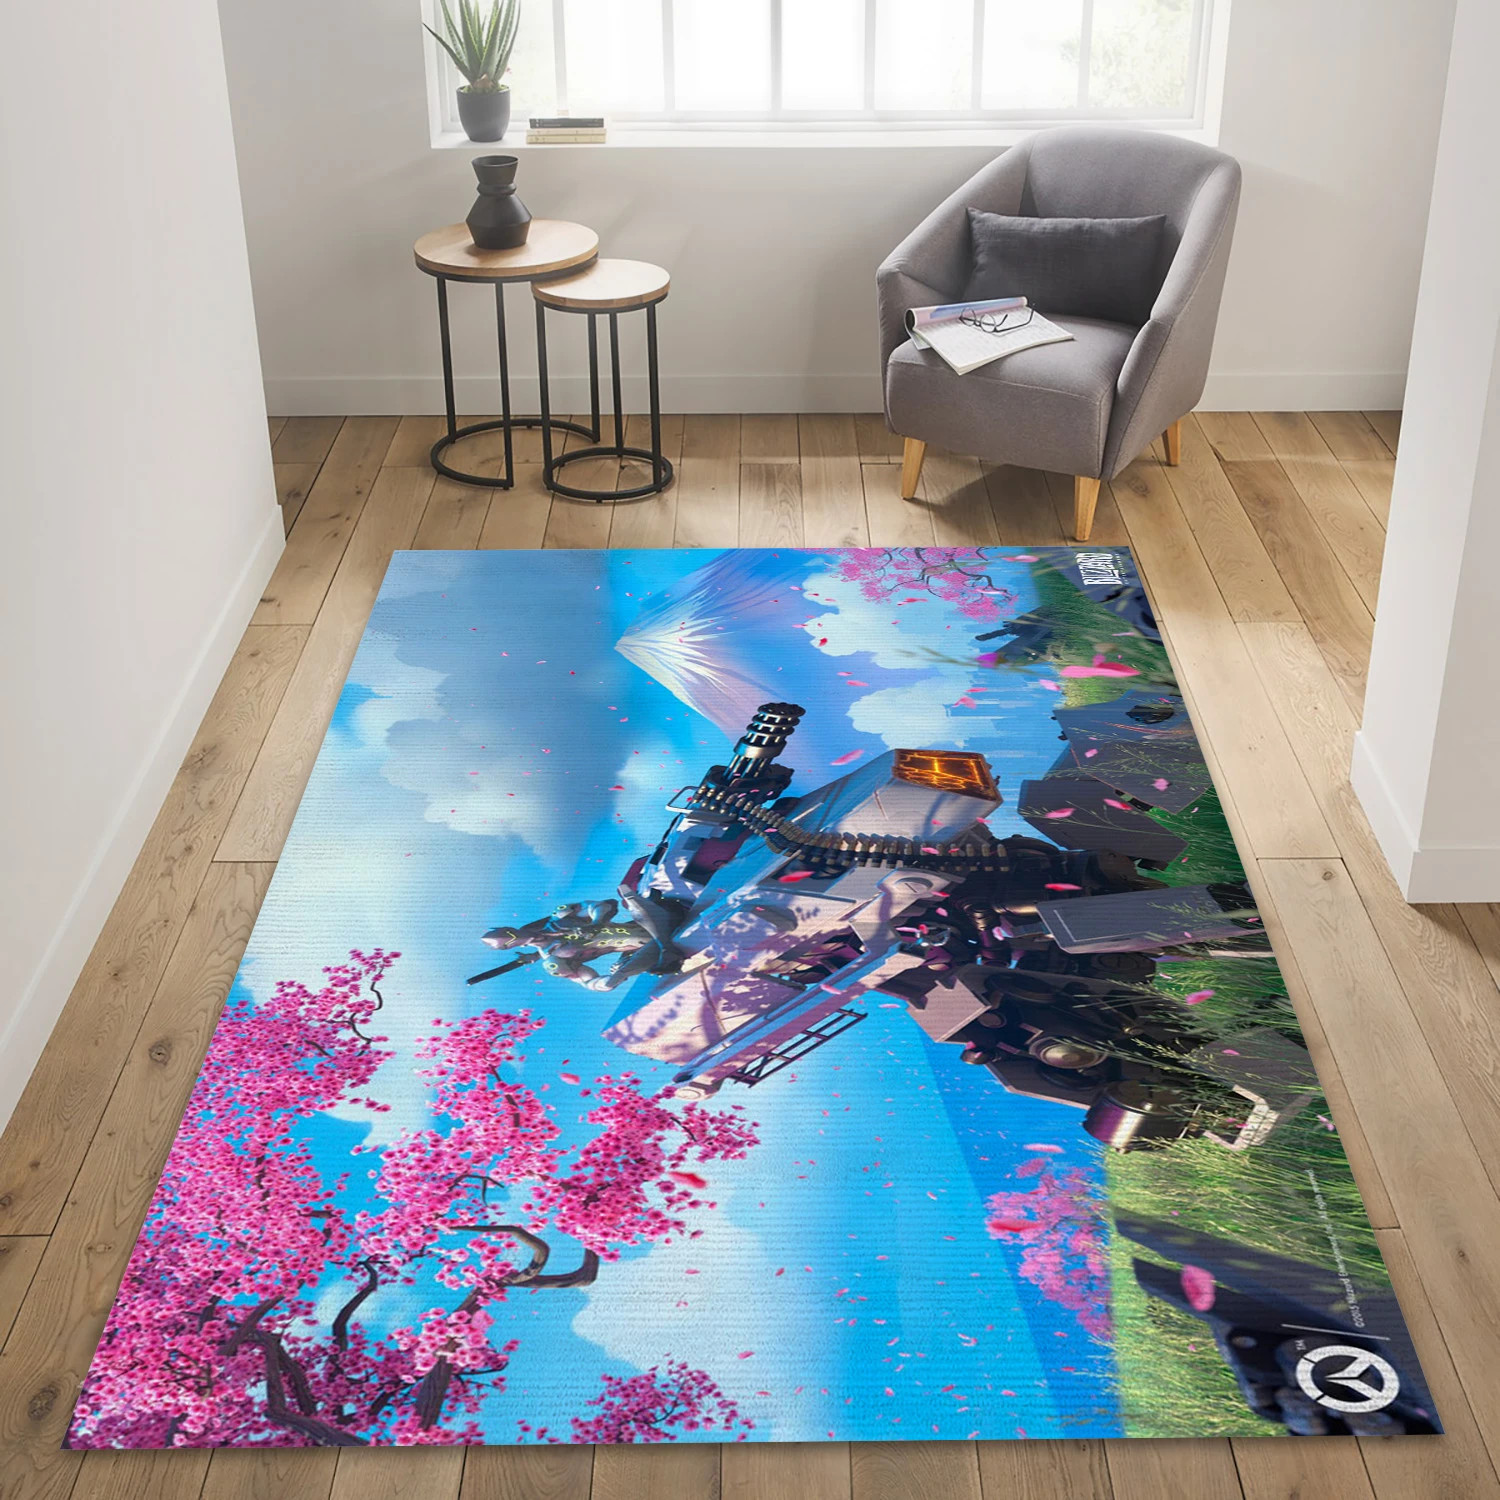 Genji Game Area Rug Carpet, Living Room Rug - Family Gift US Decor - Indoor Outdoor Rugs